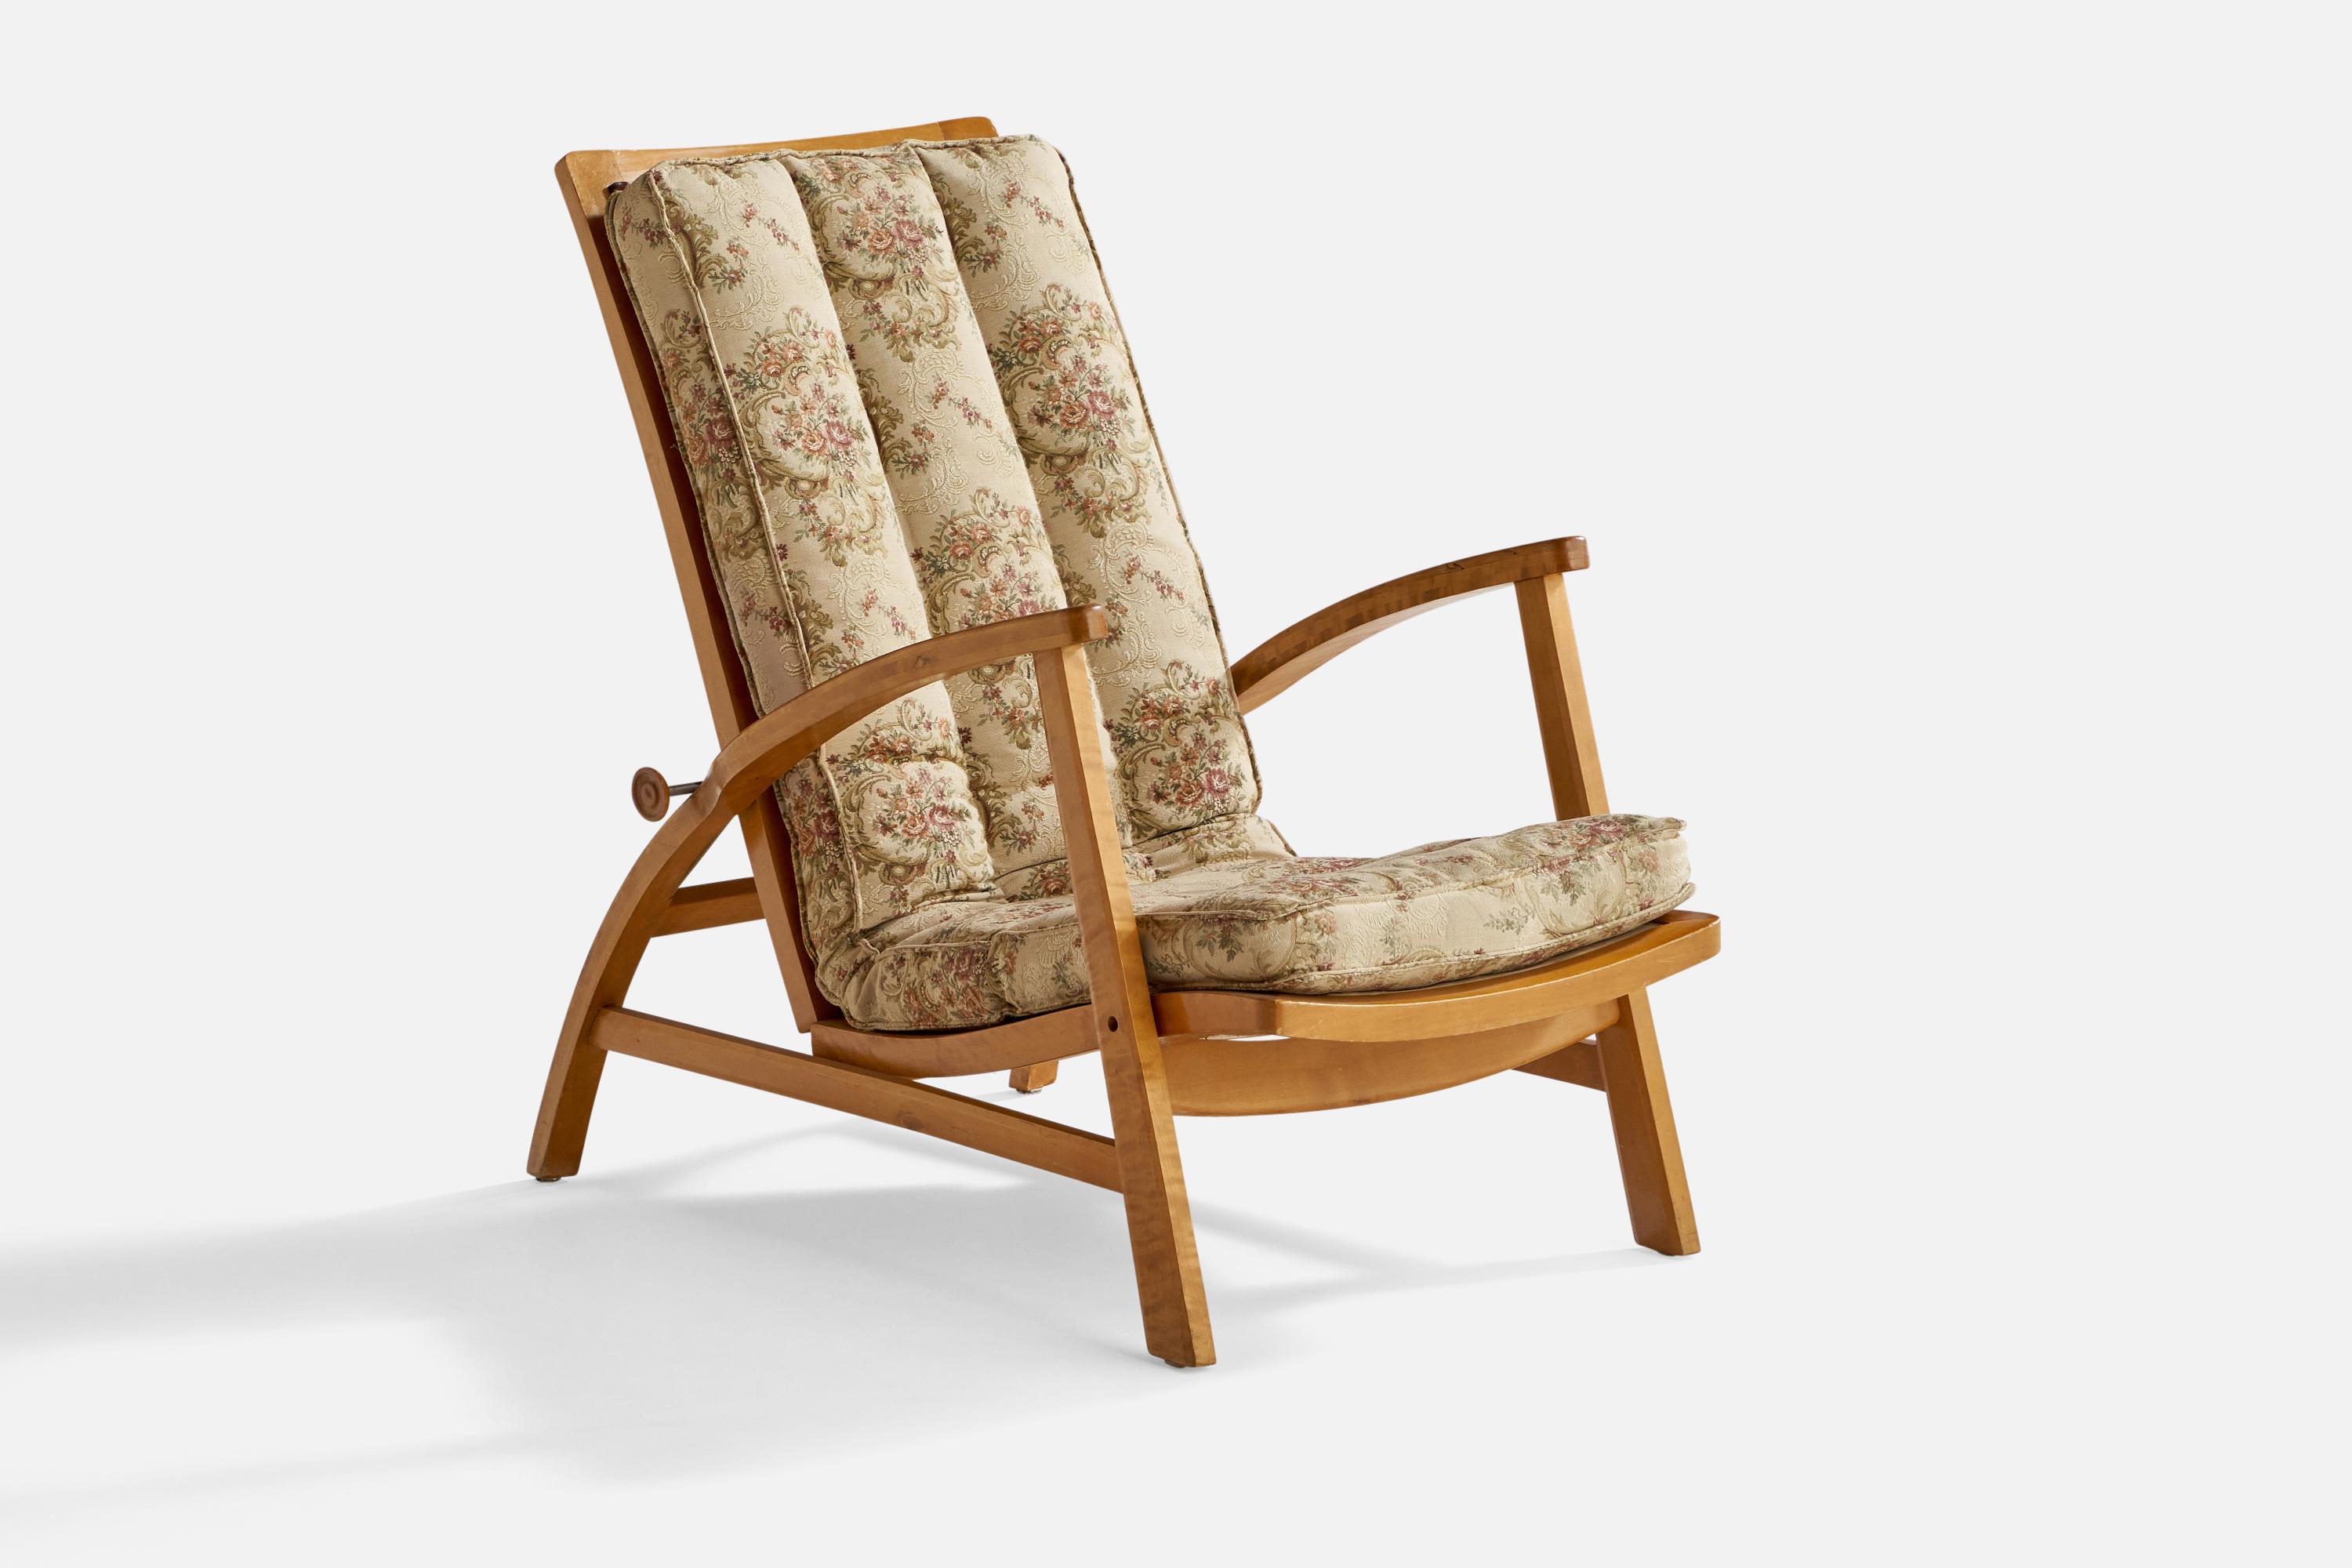 An adjustable birch and floral printed fabric lounge chair designed and produced in Sweden, 1940s.

Seat height: 14.5”
